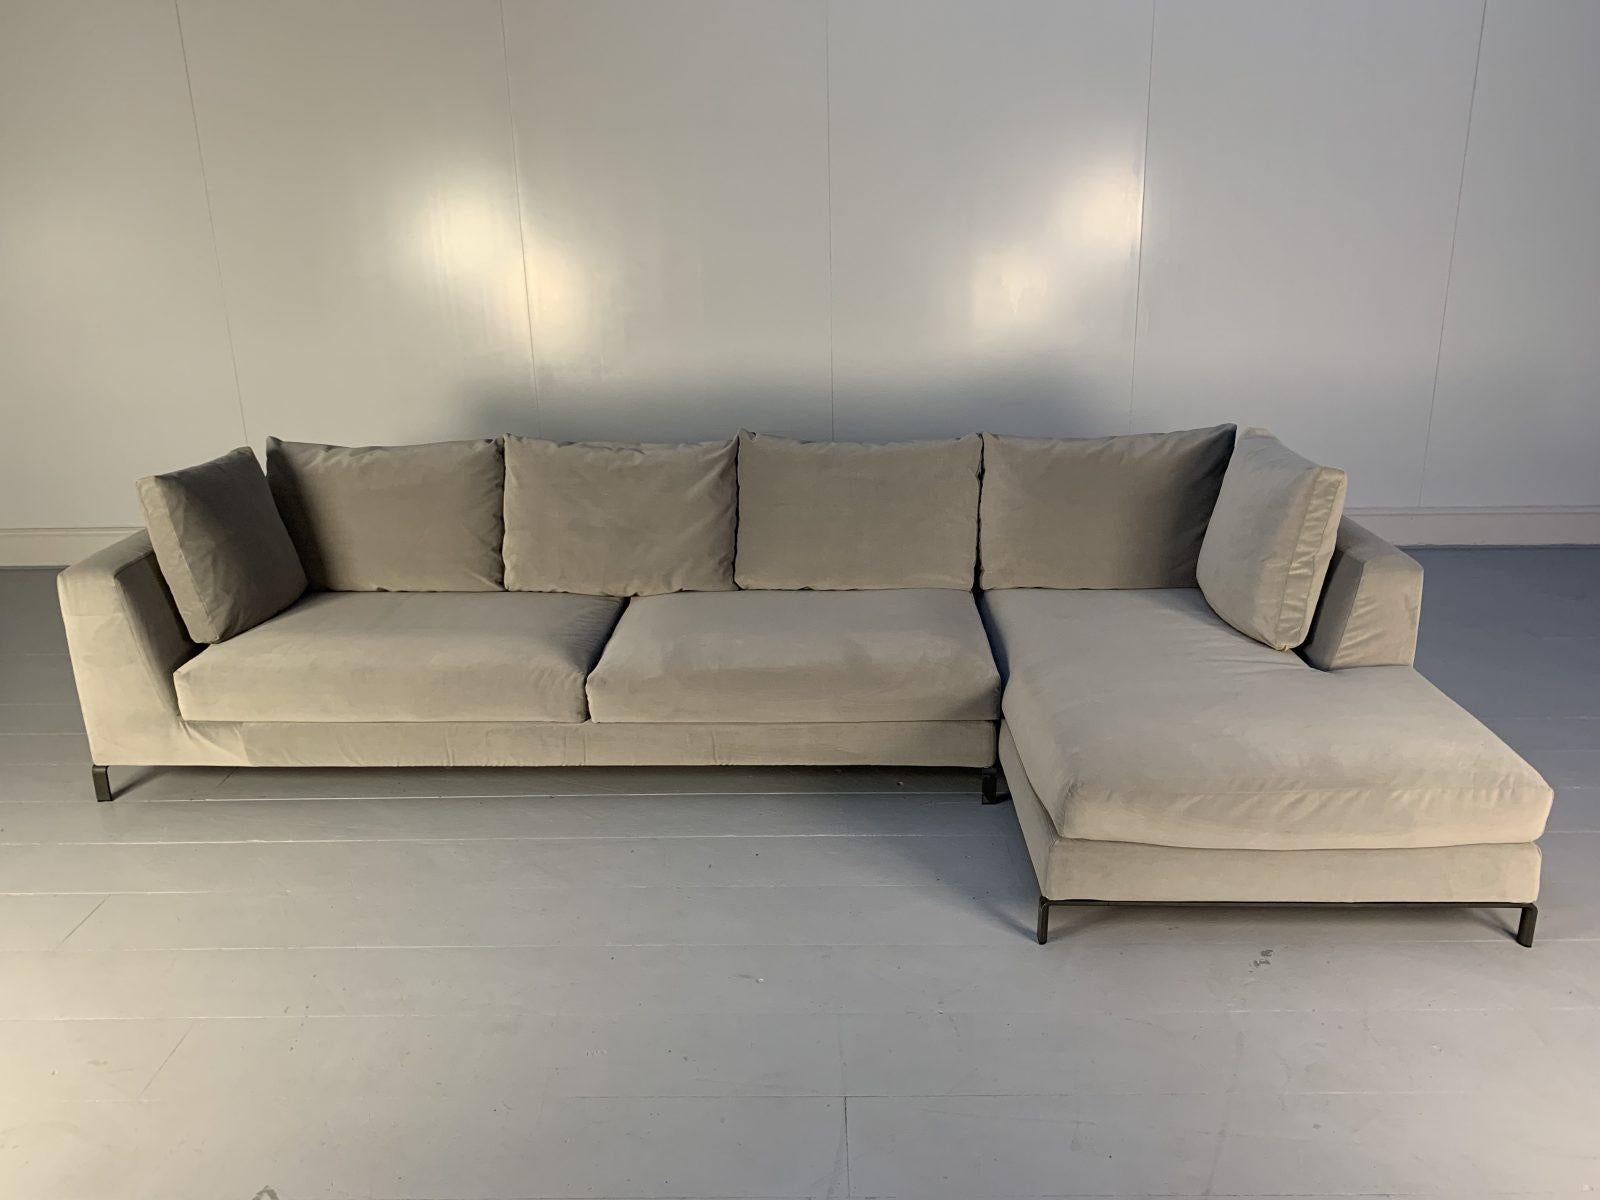 This is an iconic “Ray” Sectional L-Shape Sofa (composition RY002) from the world renown Italian furniture house of B&B Italia.

In a world of temporary pleasures, B&B Italia create beautiful furniture that remains a joy forever.

Recently